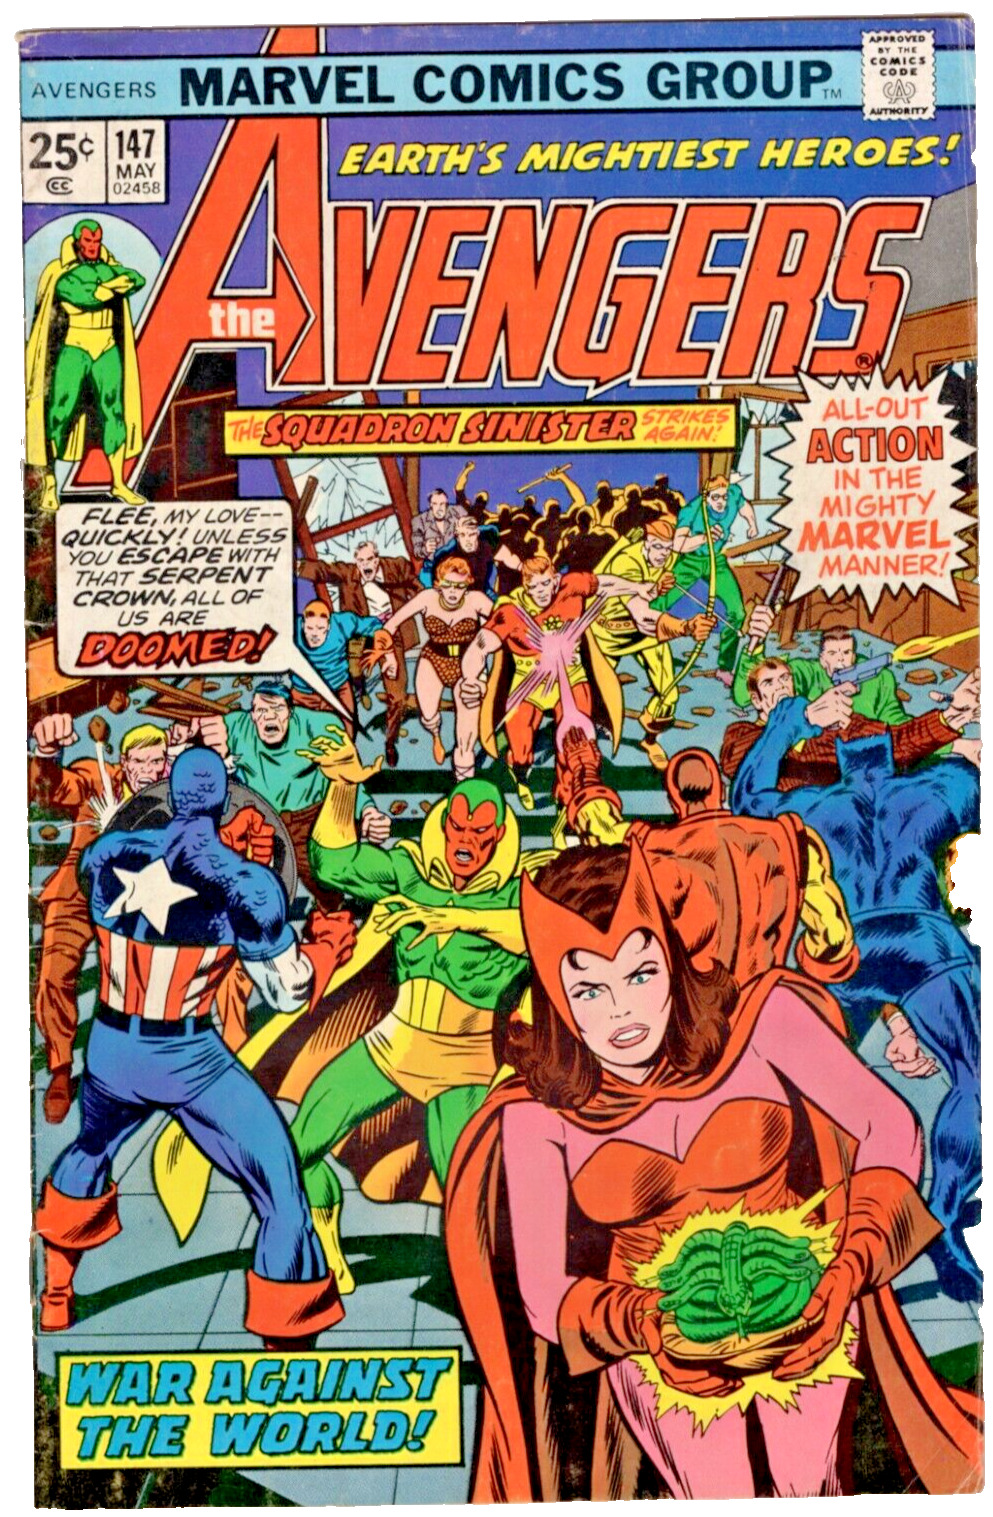 The Avengers #147 (May. 1976, Marvel)